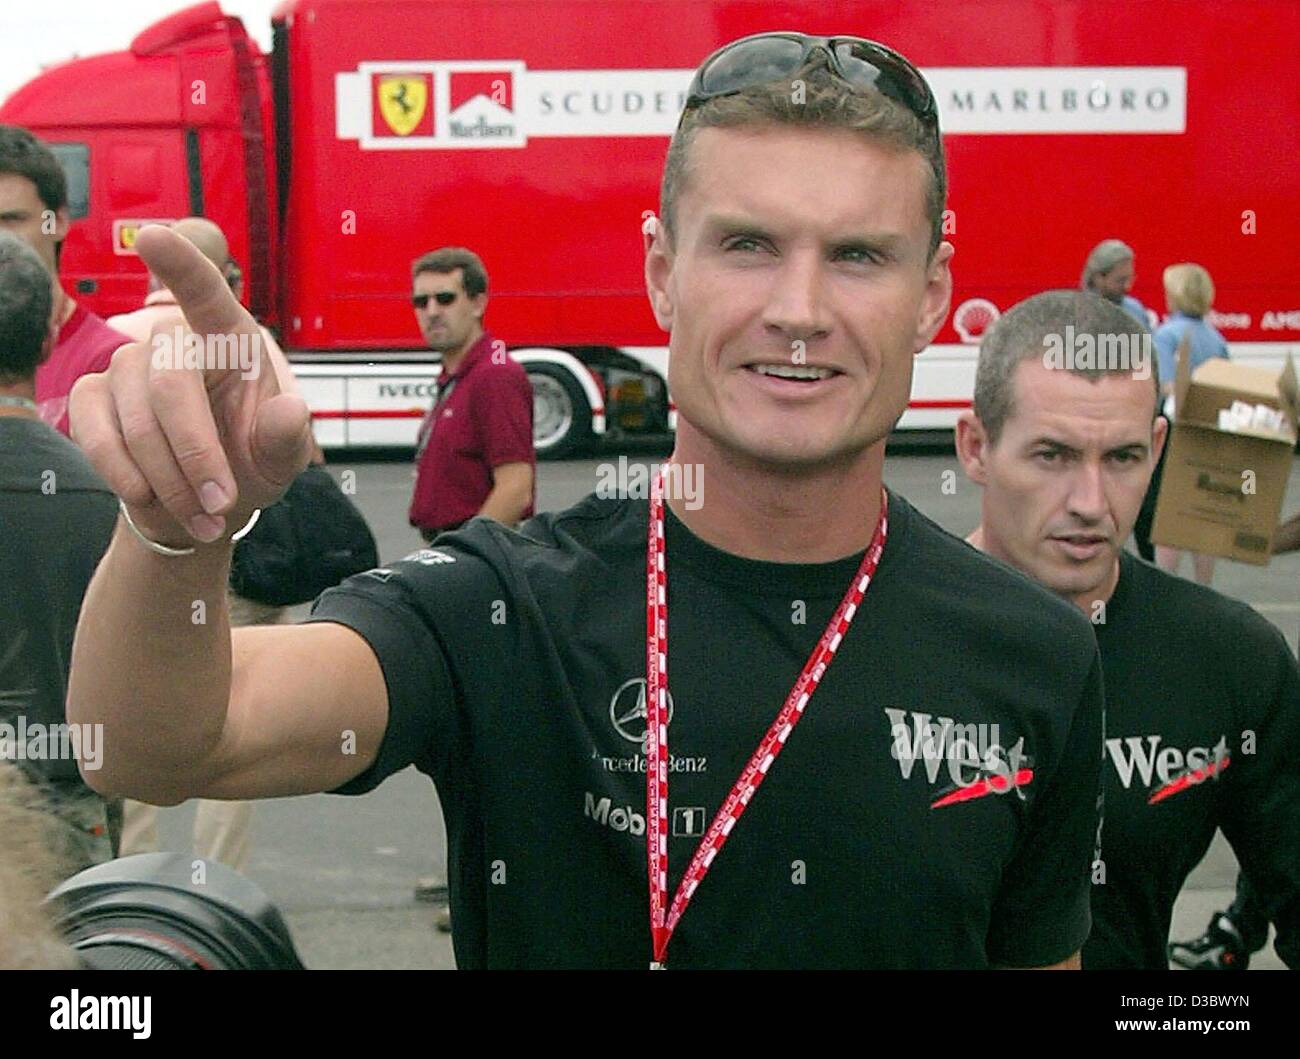 (dpa) - Scottish formula one pilot David Coulthard of McLaren-Mercedes gestures at the Hungaroring race track in Budapest, Hungary, 21 August 2003. The 13th run of the world championships, the Grand Prix of Hungary, will take place on 24 August. Stock Photo